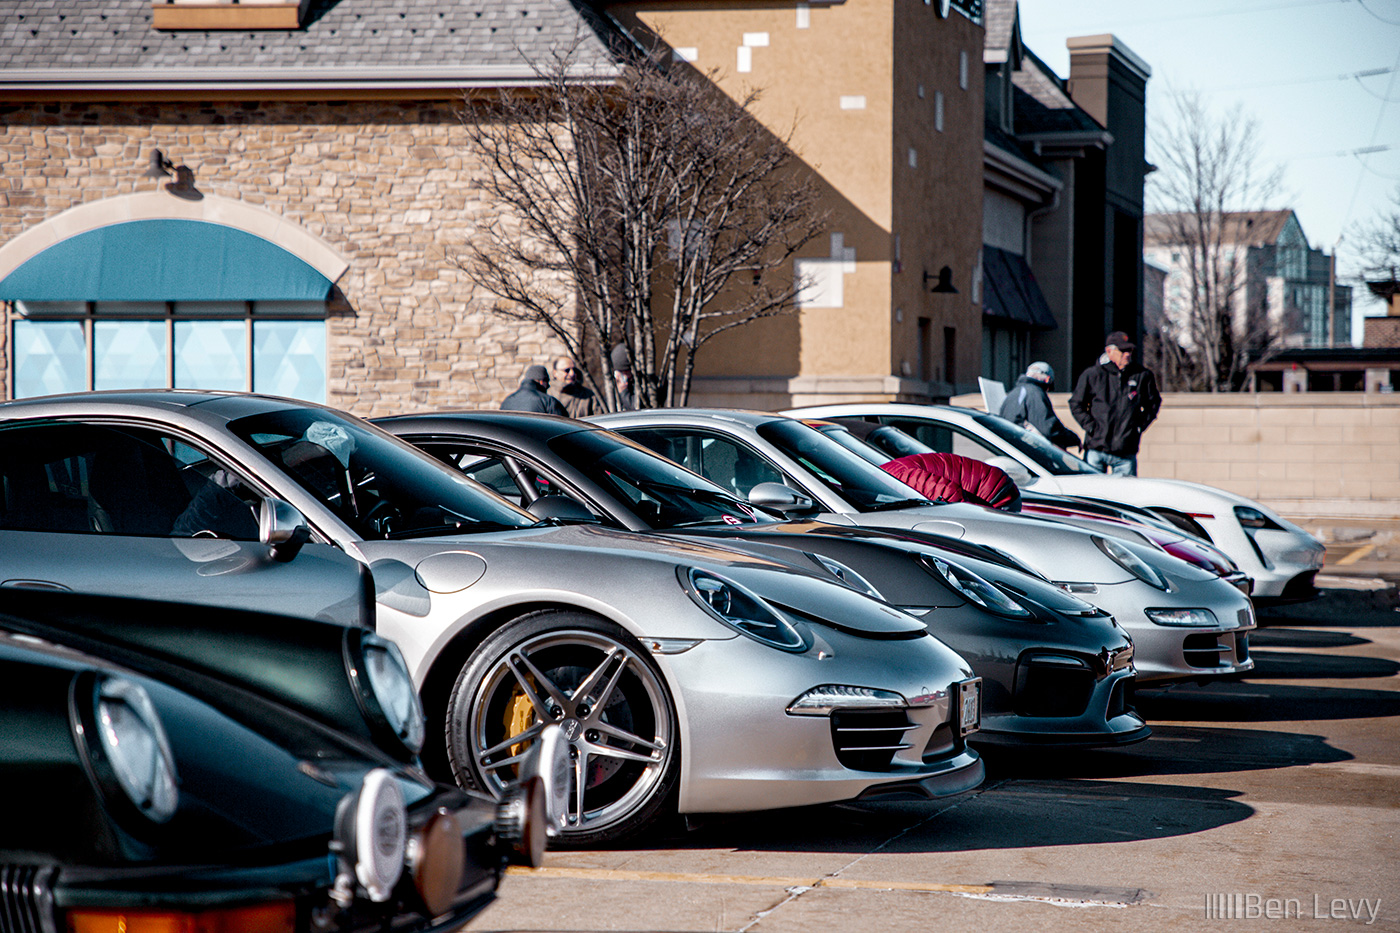 Line of Porsches at Labriola Bakery & Cafe in Oak Brook